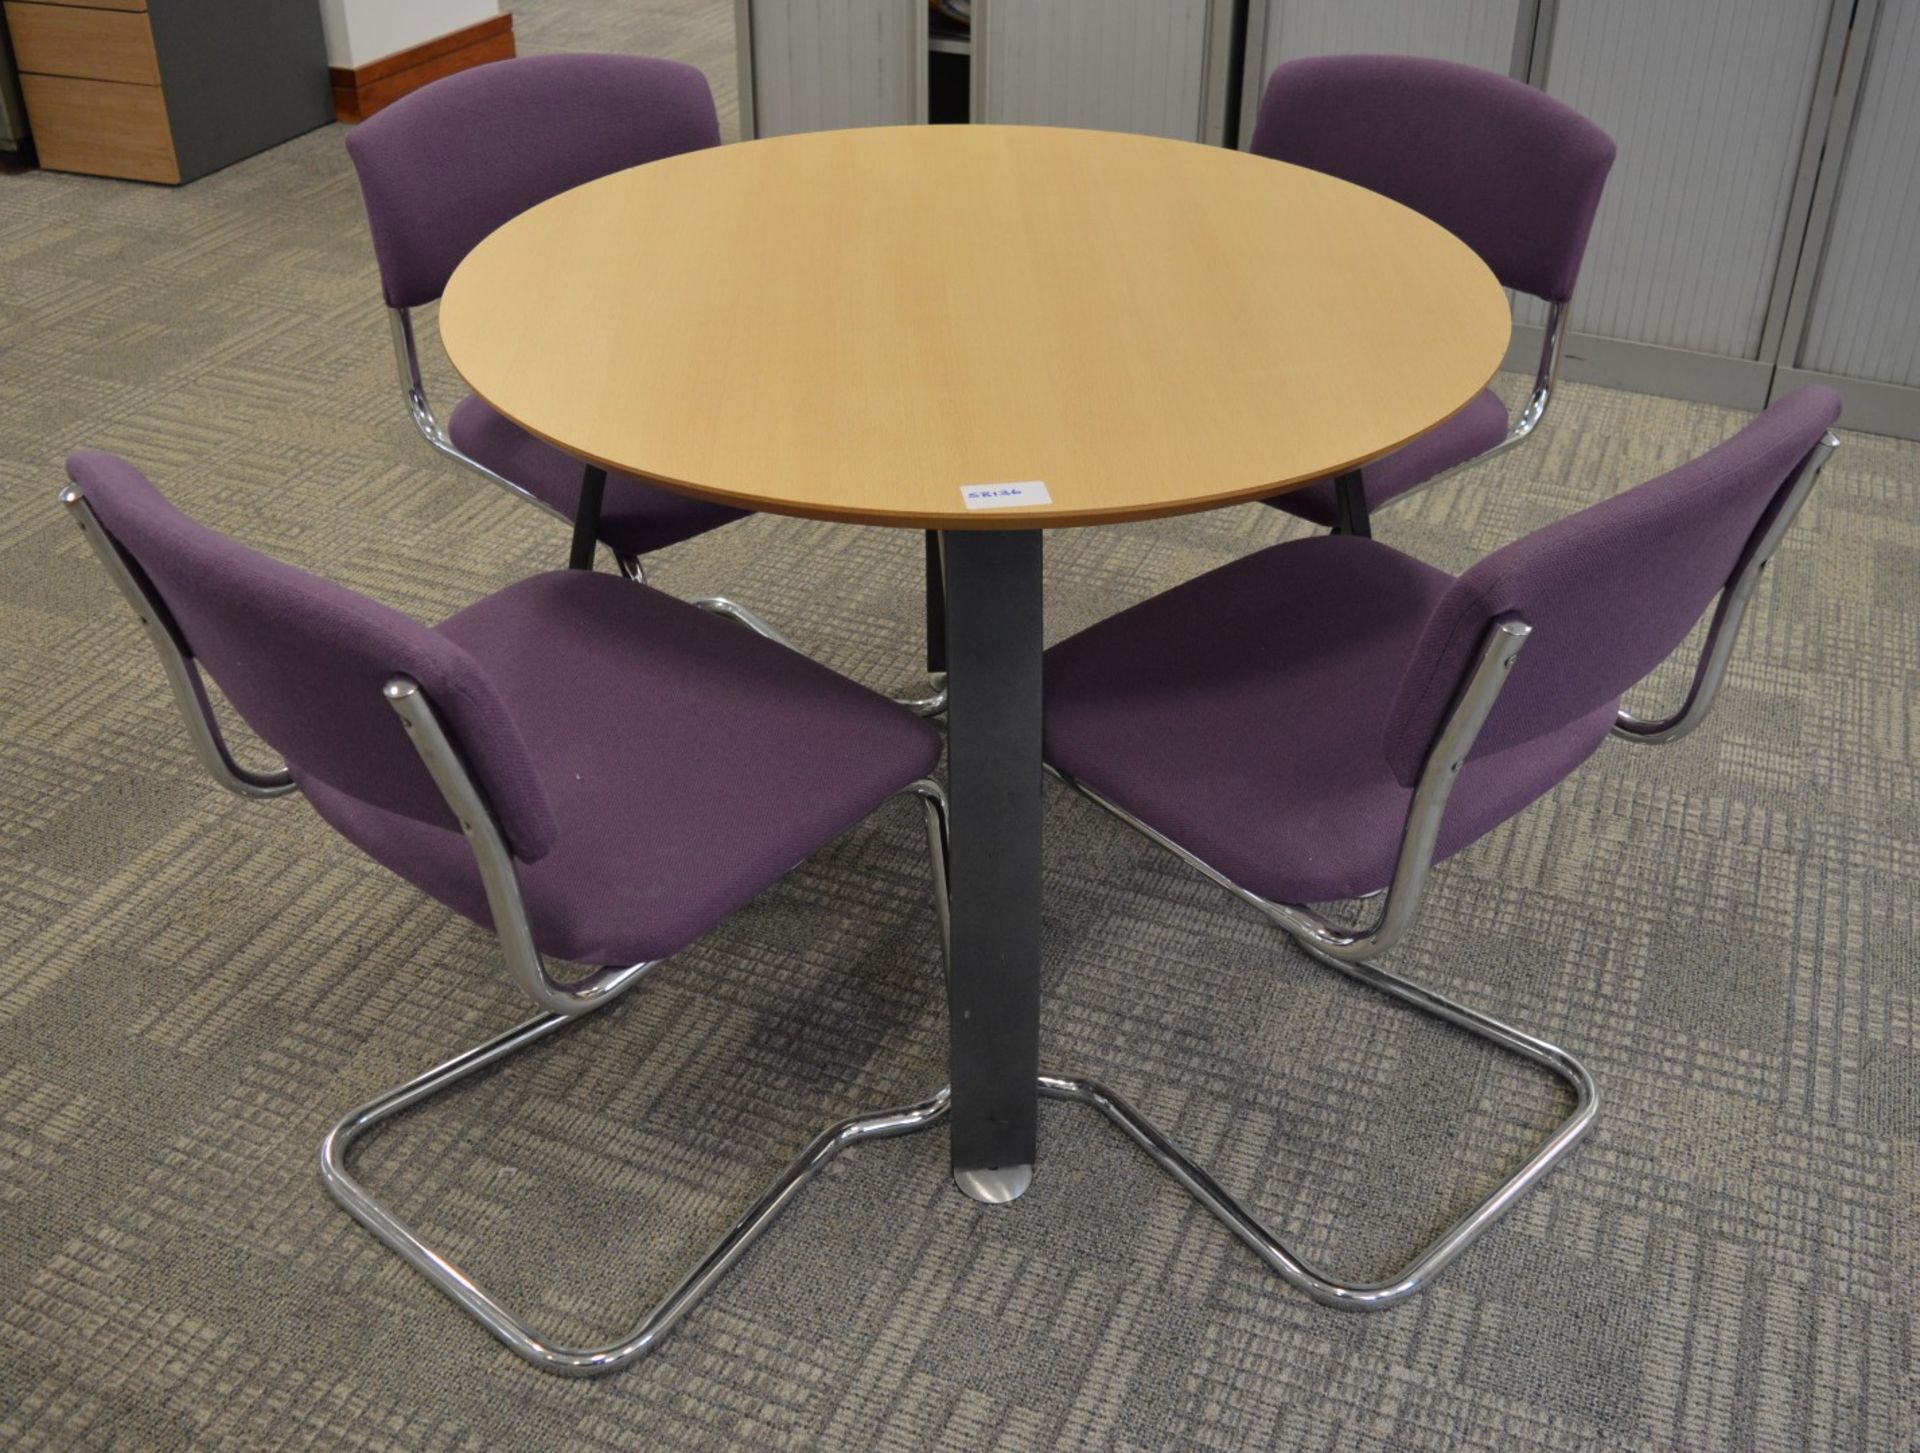 4 x Office Stacking Chairs - Purple Fabric With Chrome Base - CL106 - Good Condition - Location: - Image 3 of 4